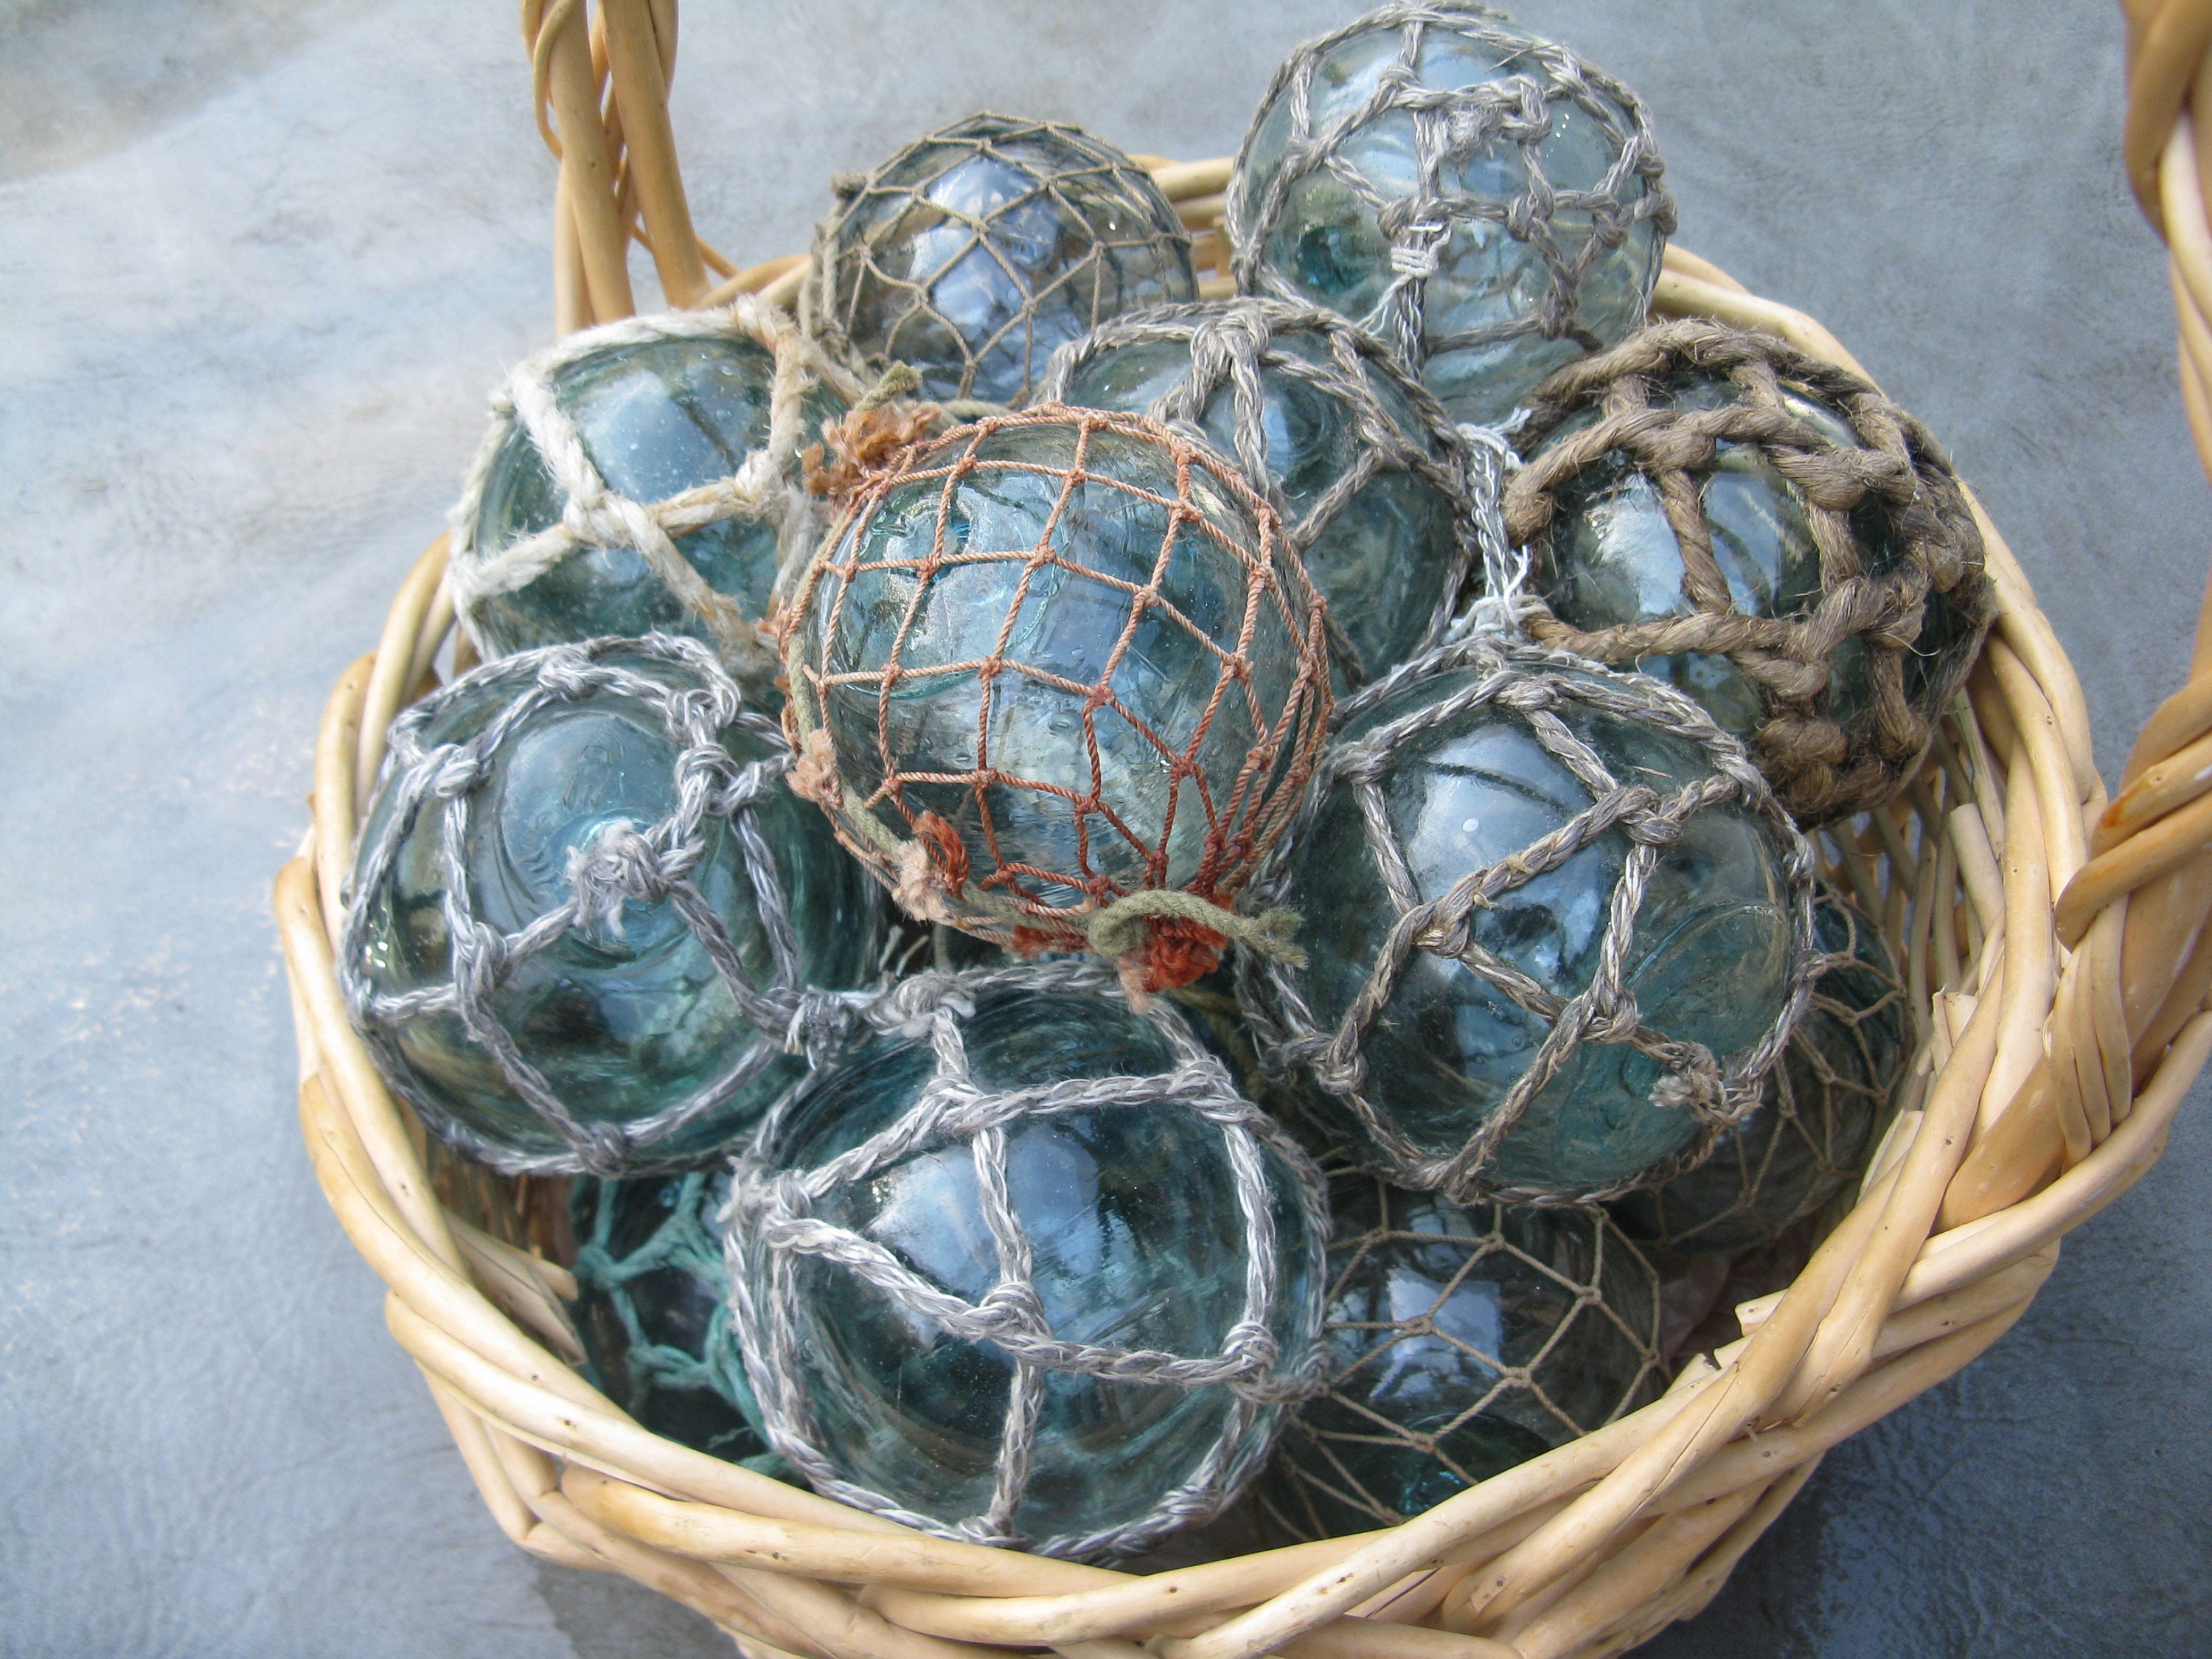 Group of 8 Netted Japanese Glass Fishing Floats, 2.53.5 Glass Float